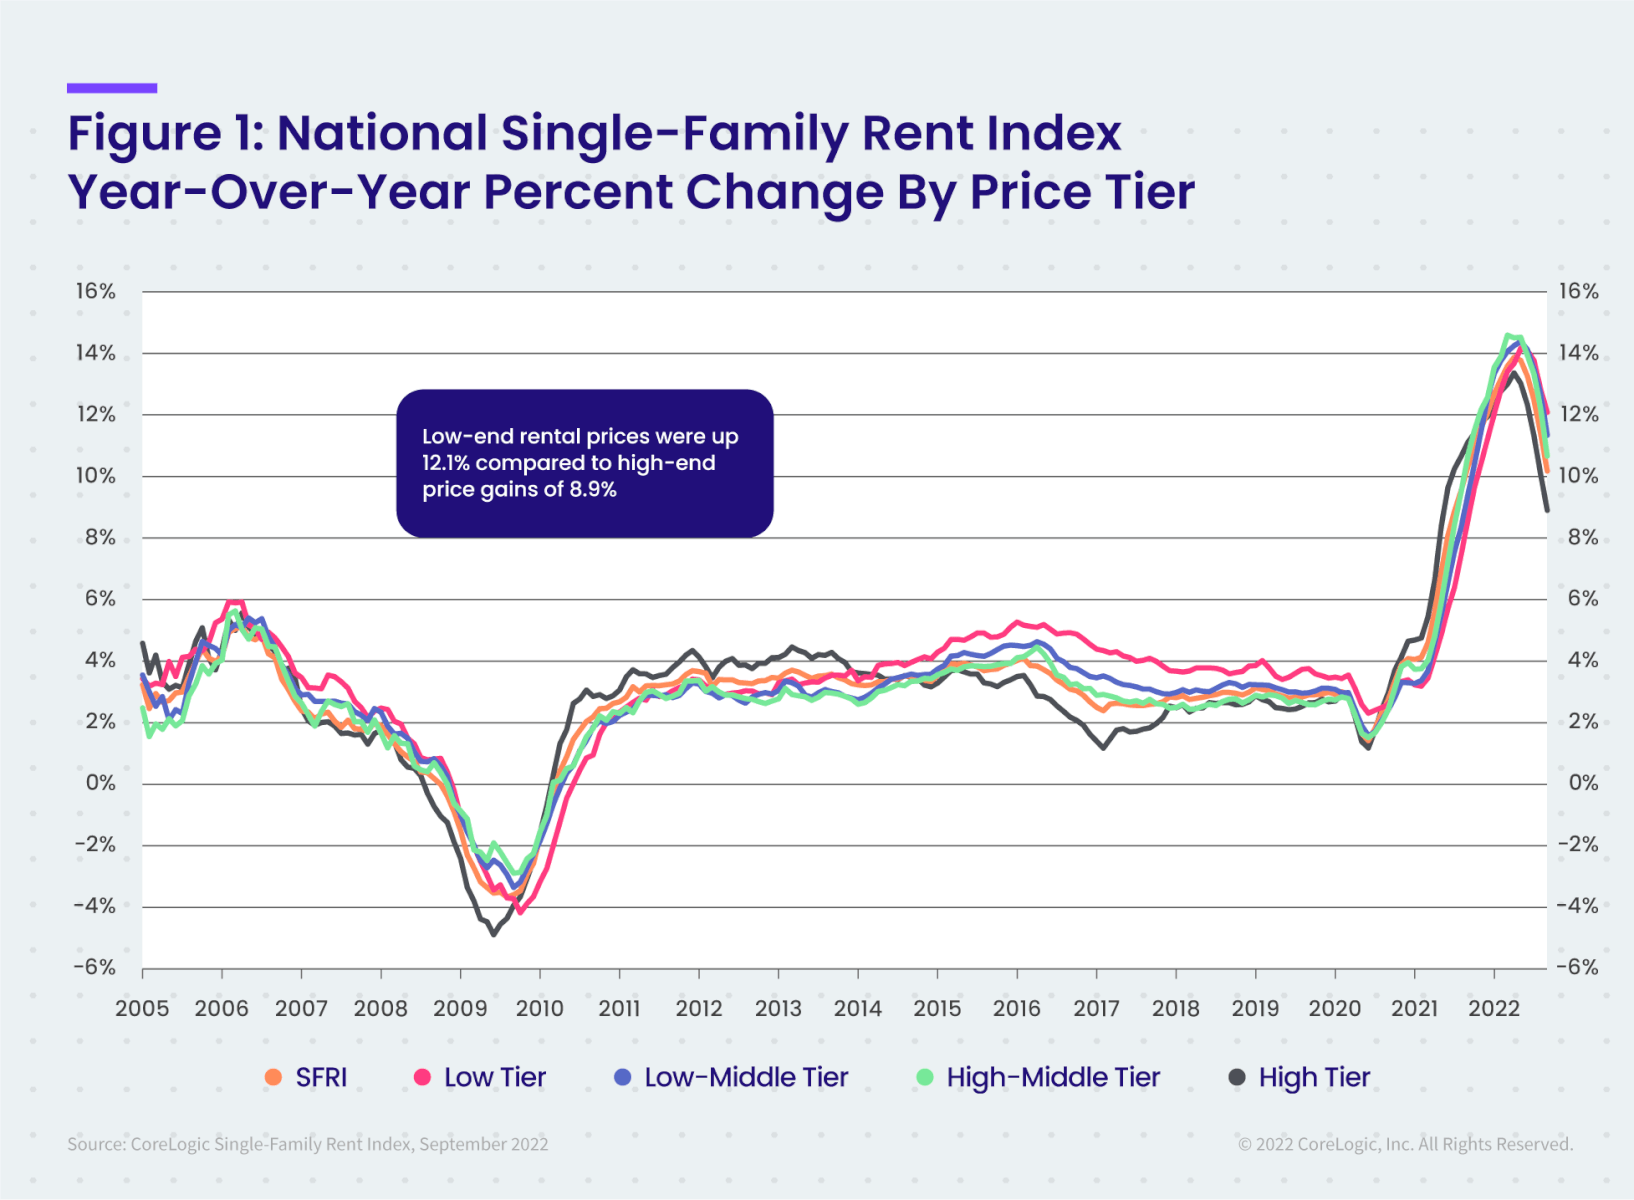 Figure 1: National Sinfle-Family Rent Index Year-Over-Year Percent Change by Price Tier